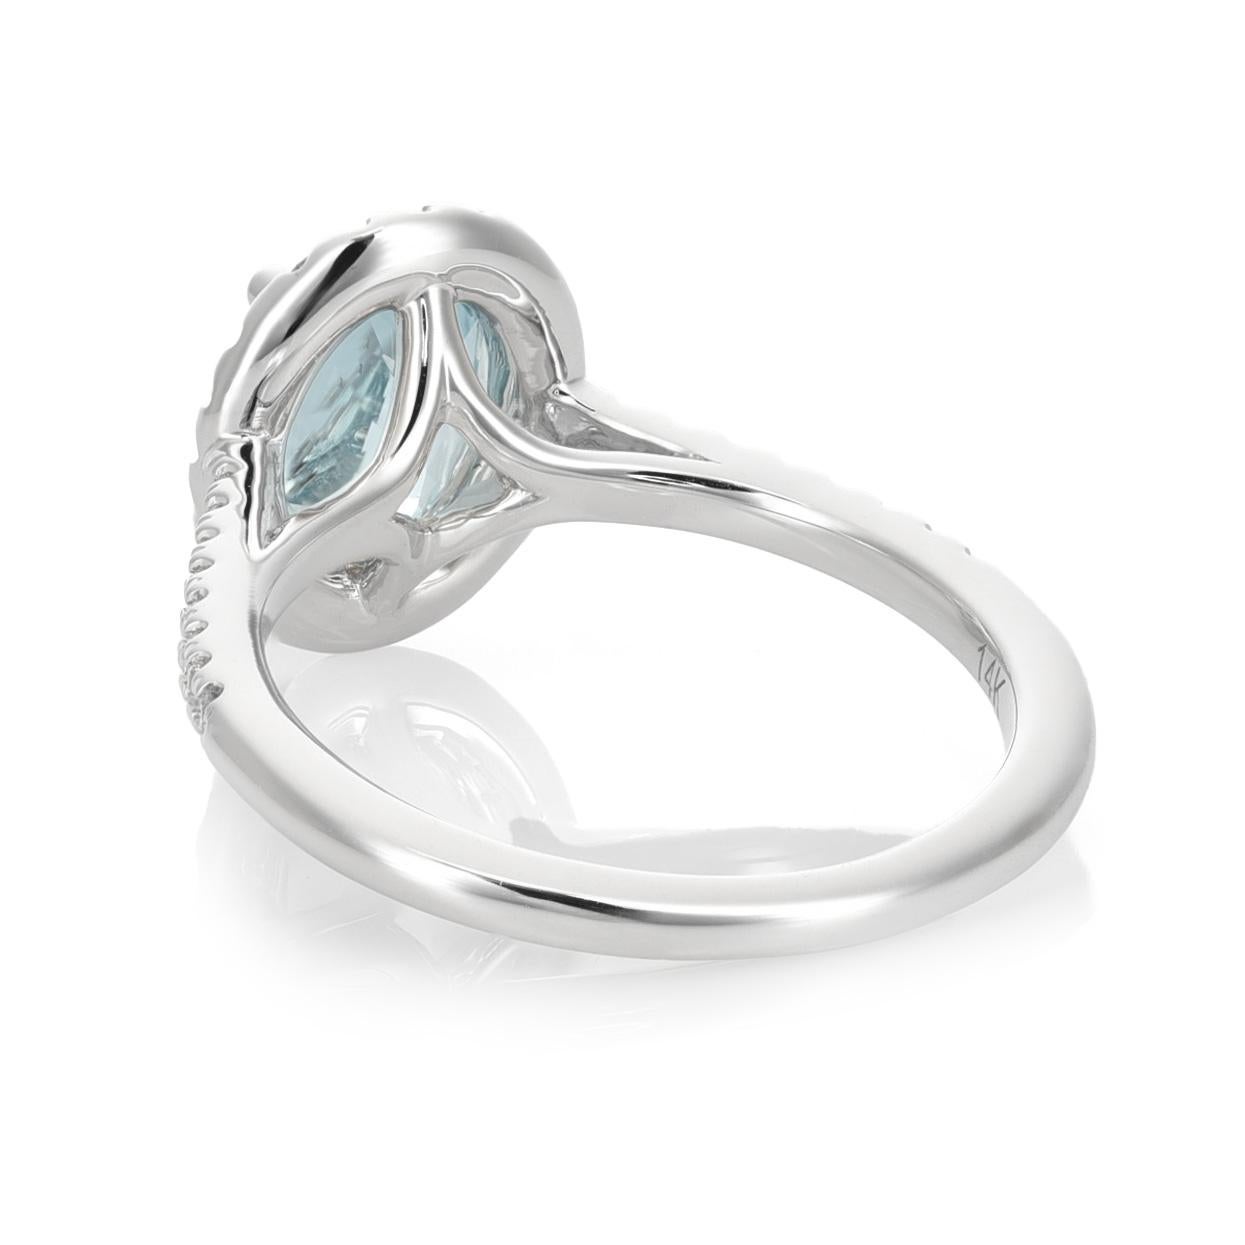 Mixed Cut 1.48 Carats Natural Aquamarine Diamonds set in 14K White Gold Ring For Sale